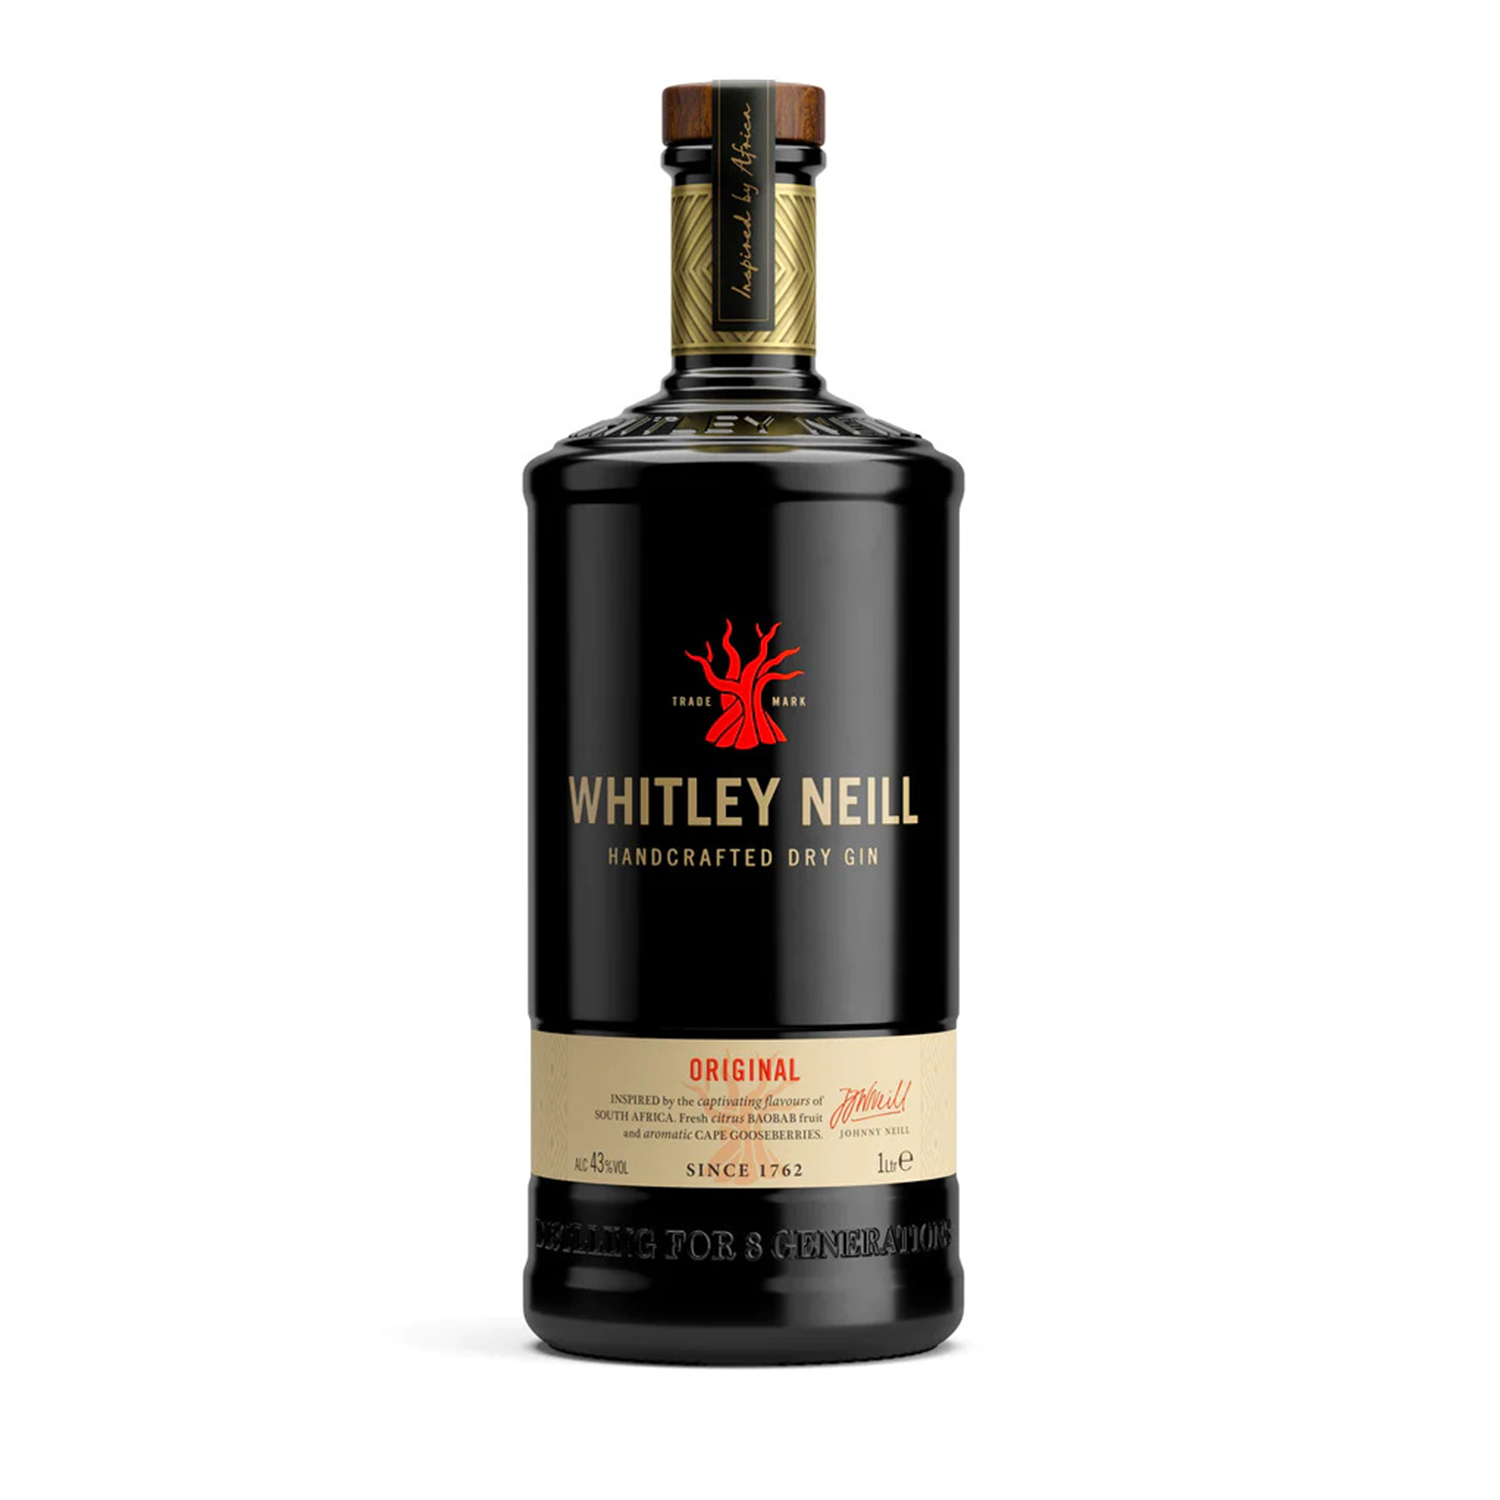 Whitley Neill Handcrafted Dry Gin 43% 1L